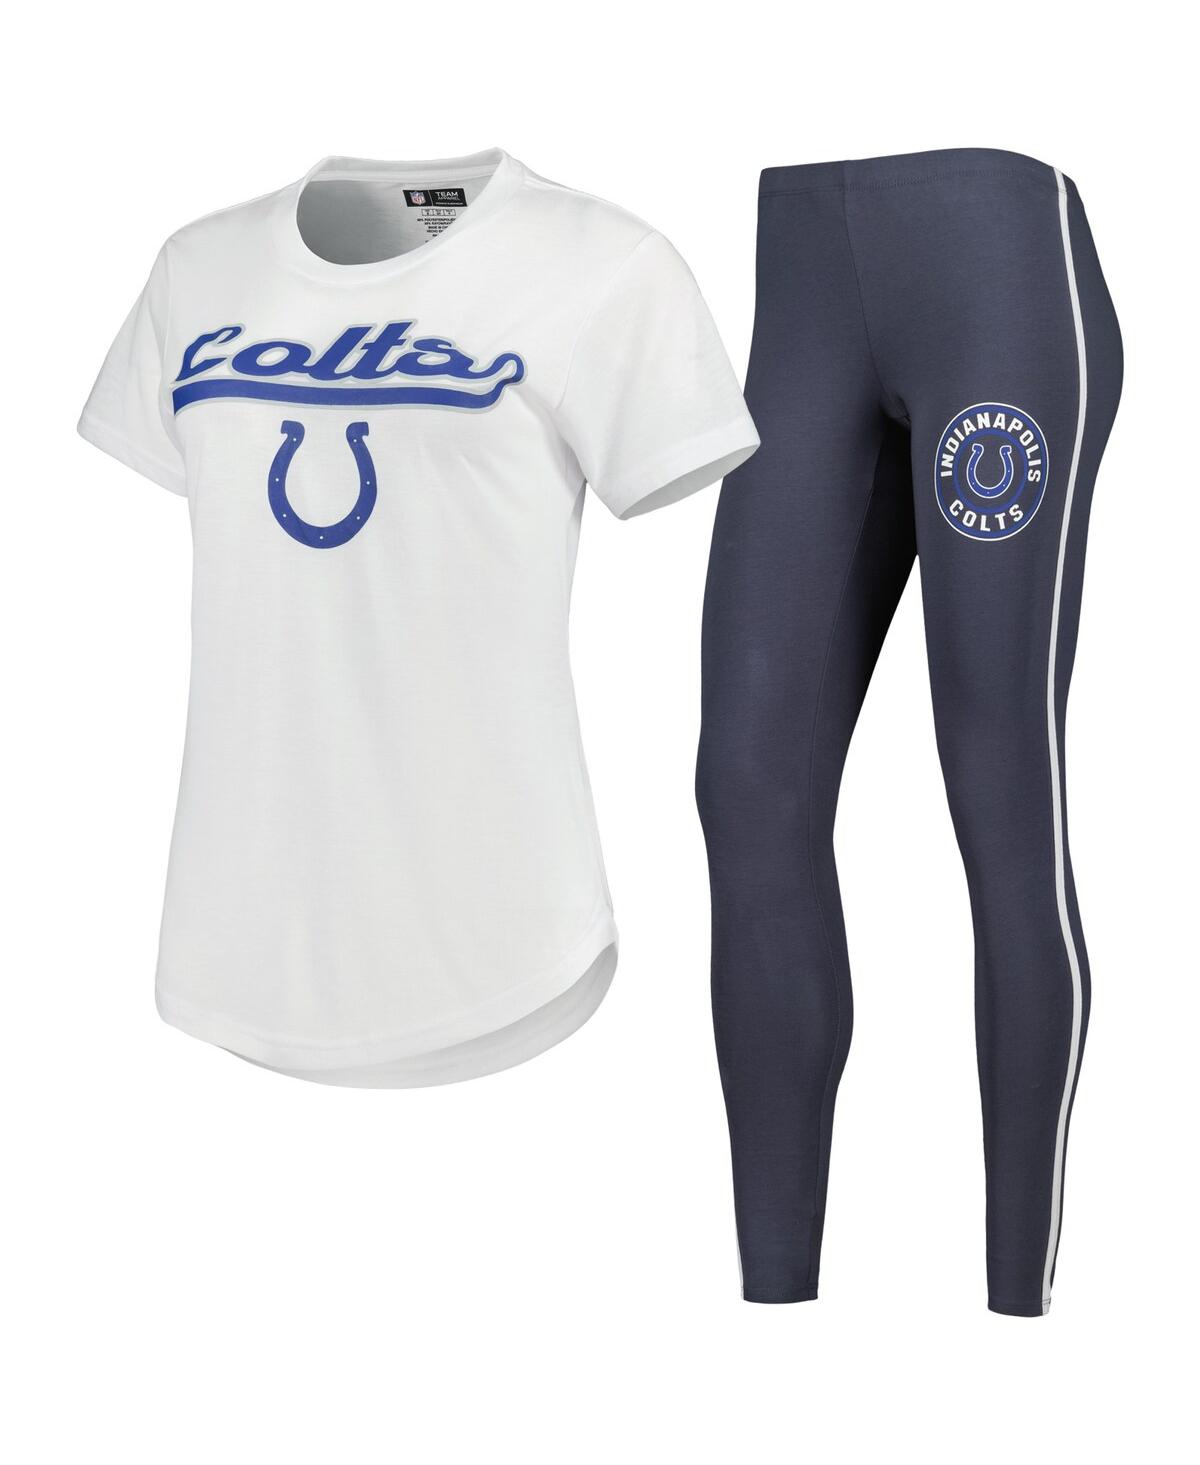 Women's Concepts Sport White, Charcoal Indianapolis Colts Sonata T-shirt and Leggings Sleep Set - White, Charcoal